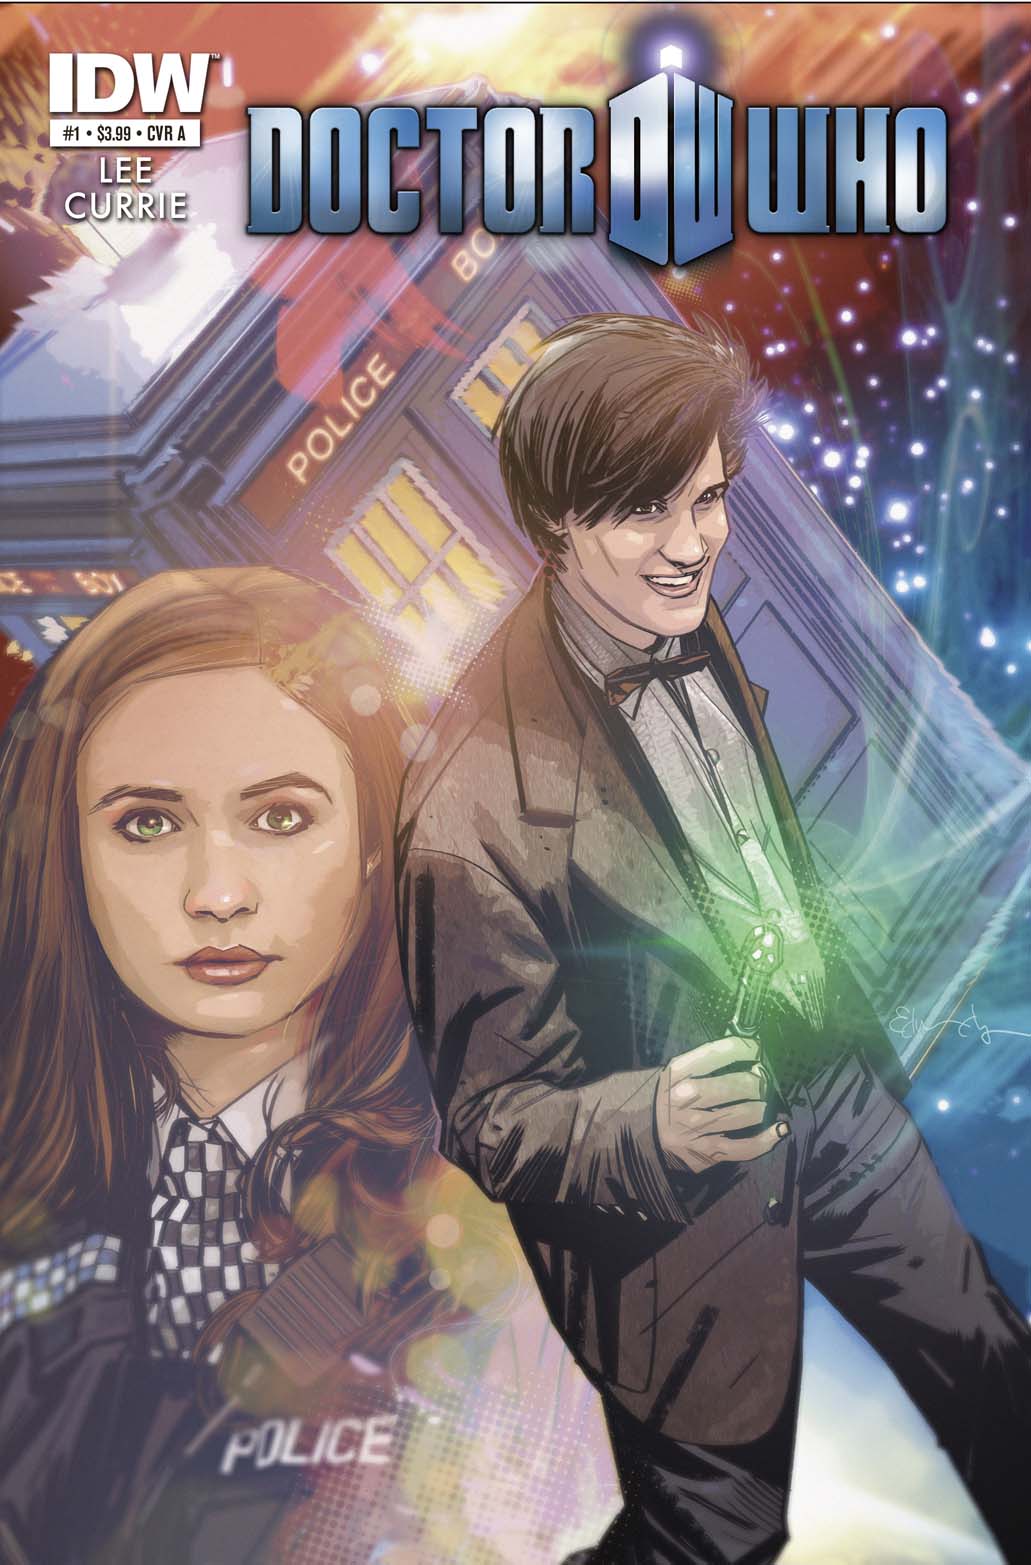 [DOCTOR WHO #1 cover]